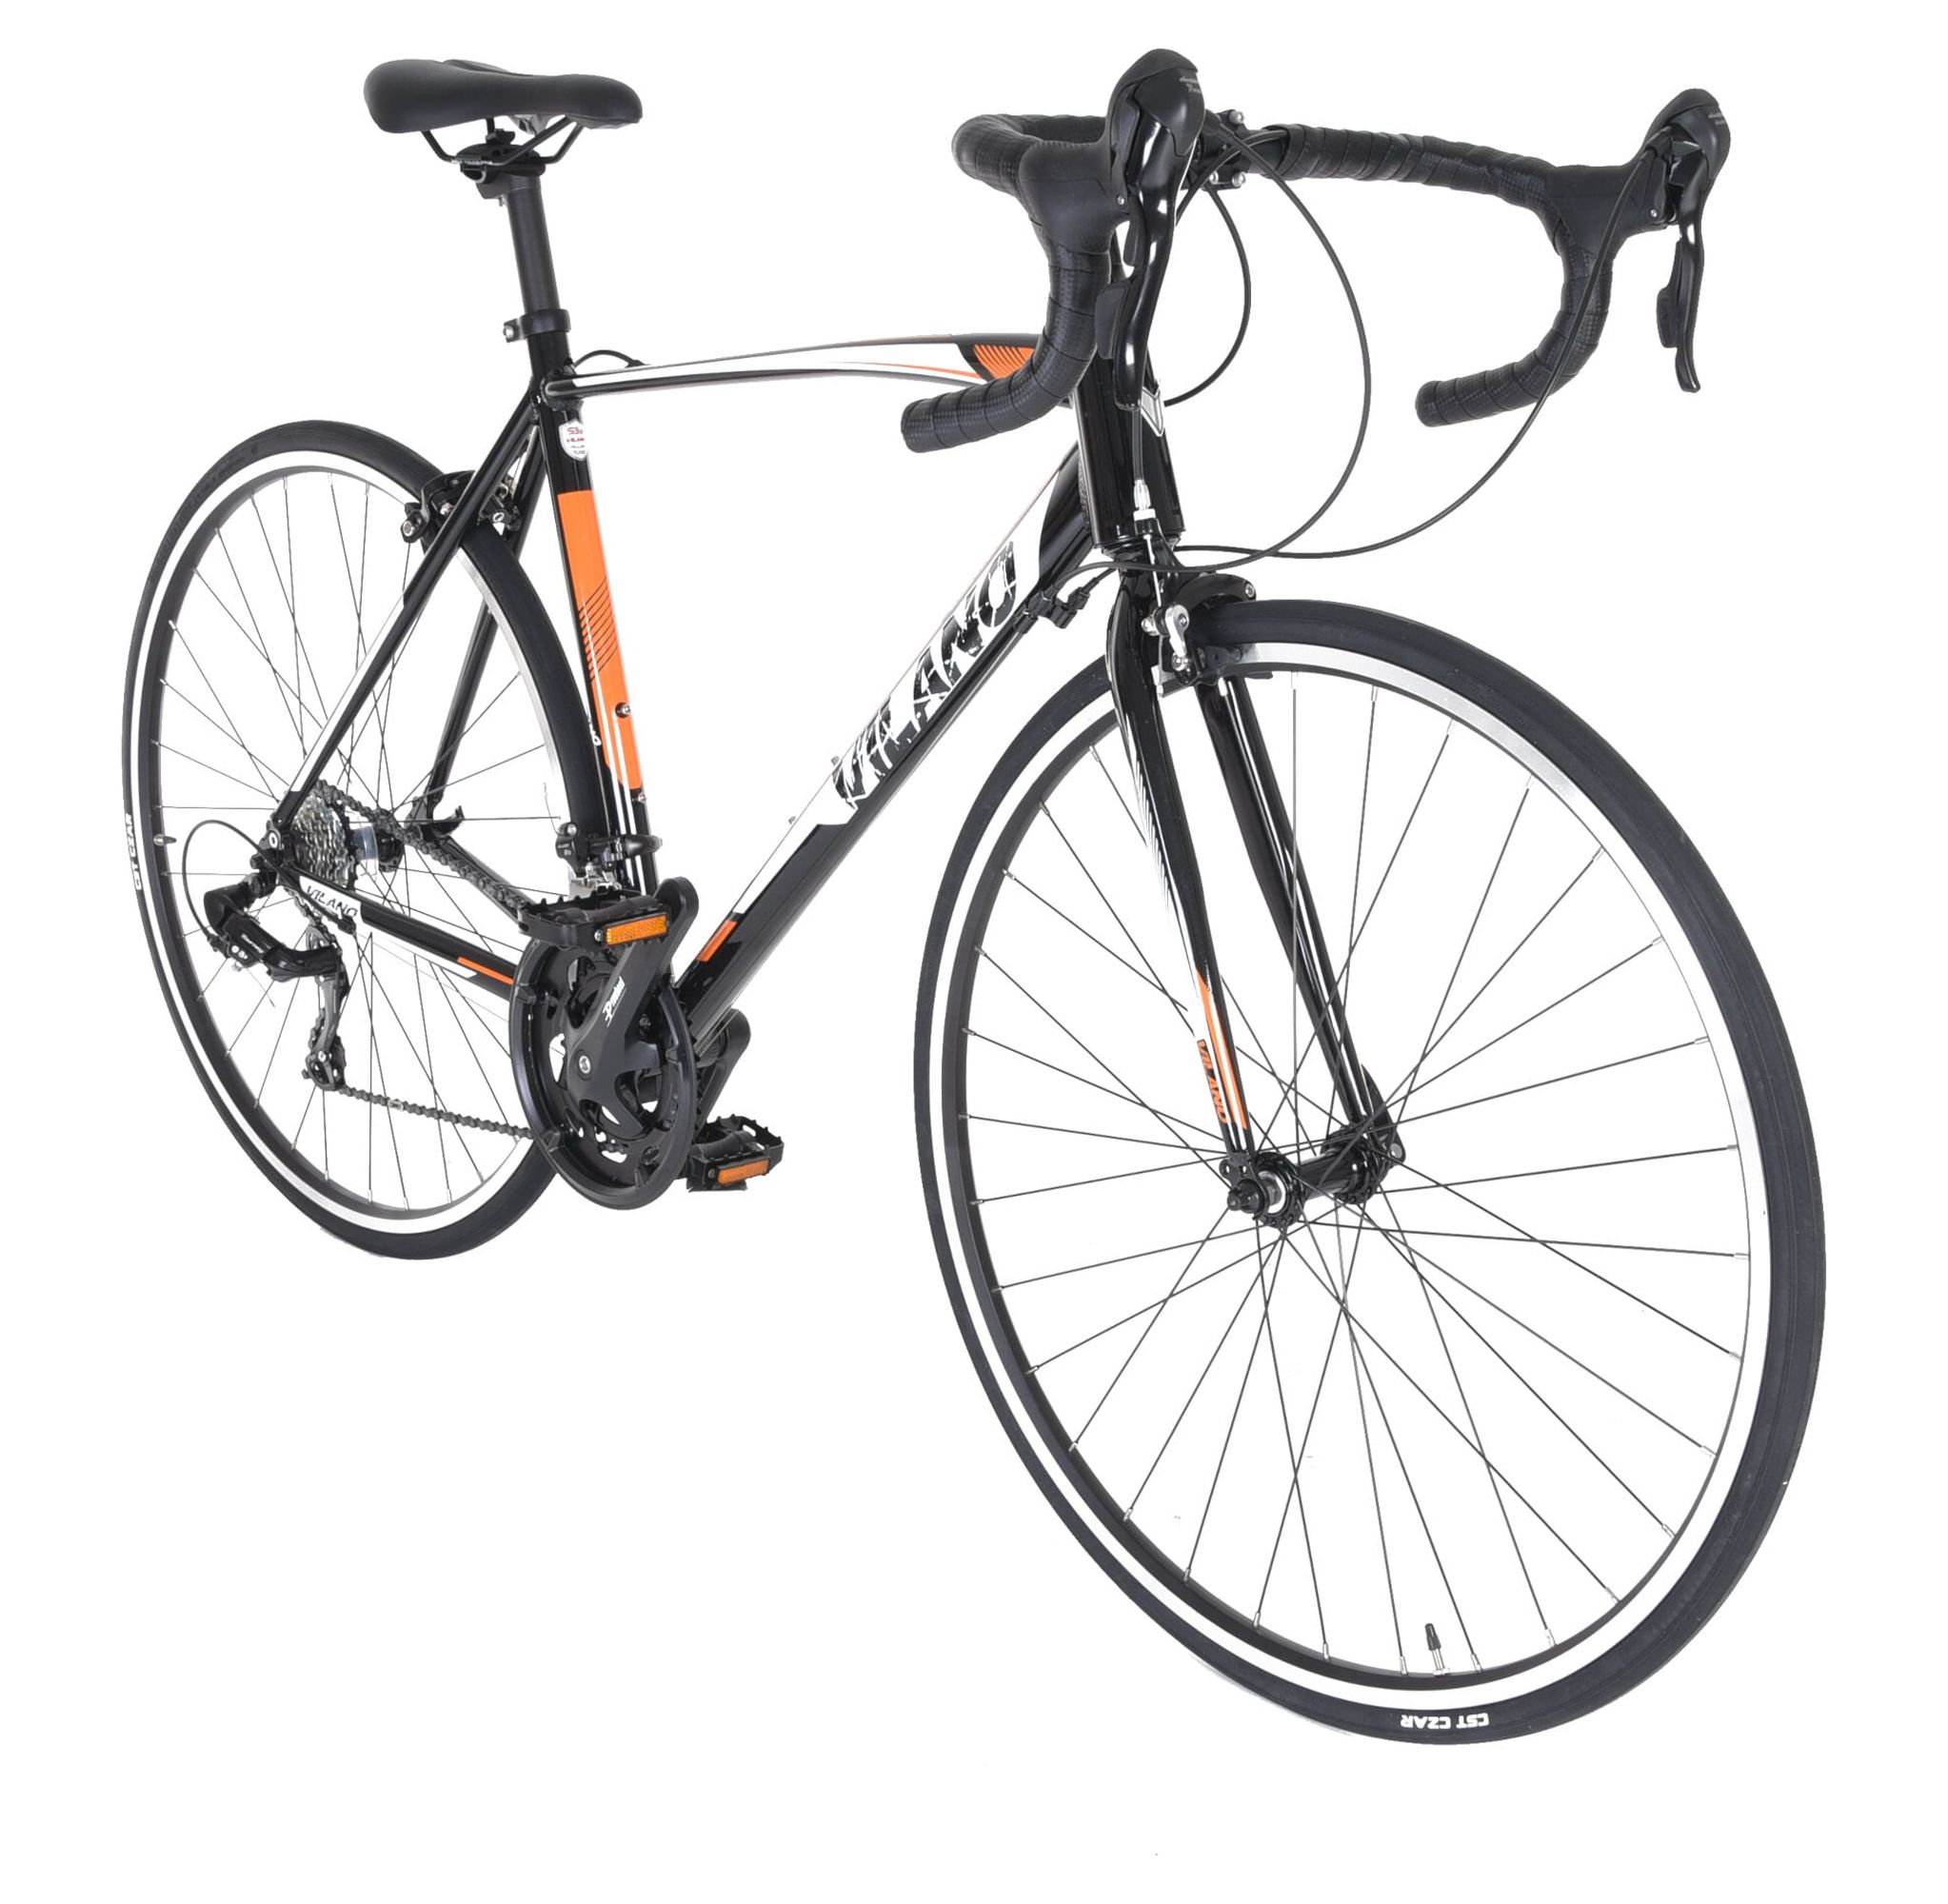 Vilano Shadow 3.0 Road Bike with Integrated Shifters - image 1 of 8